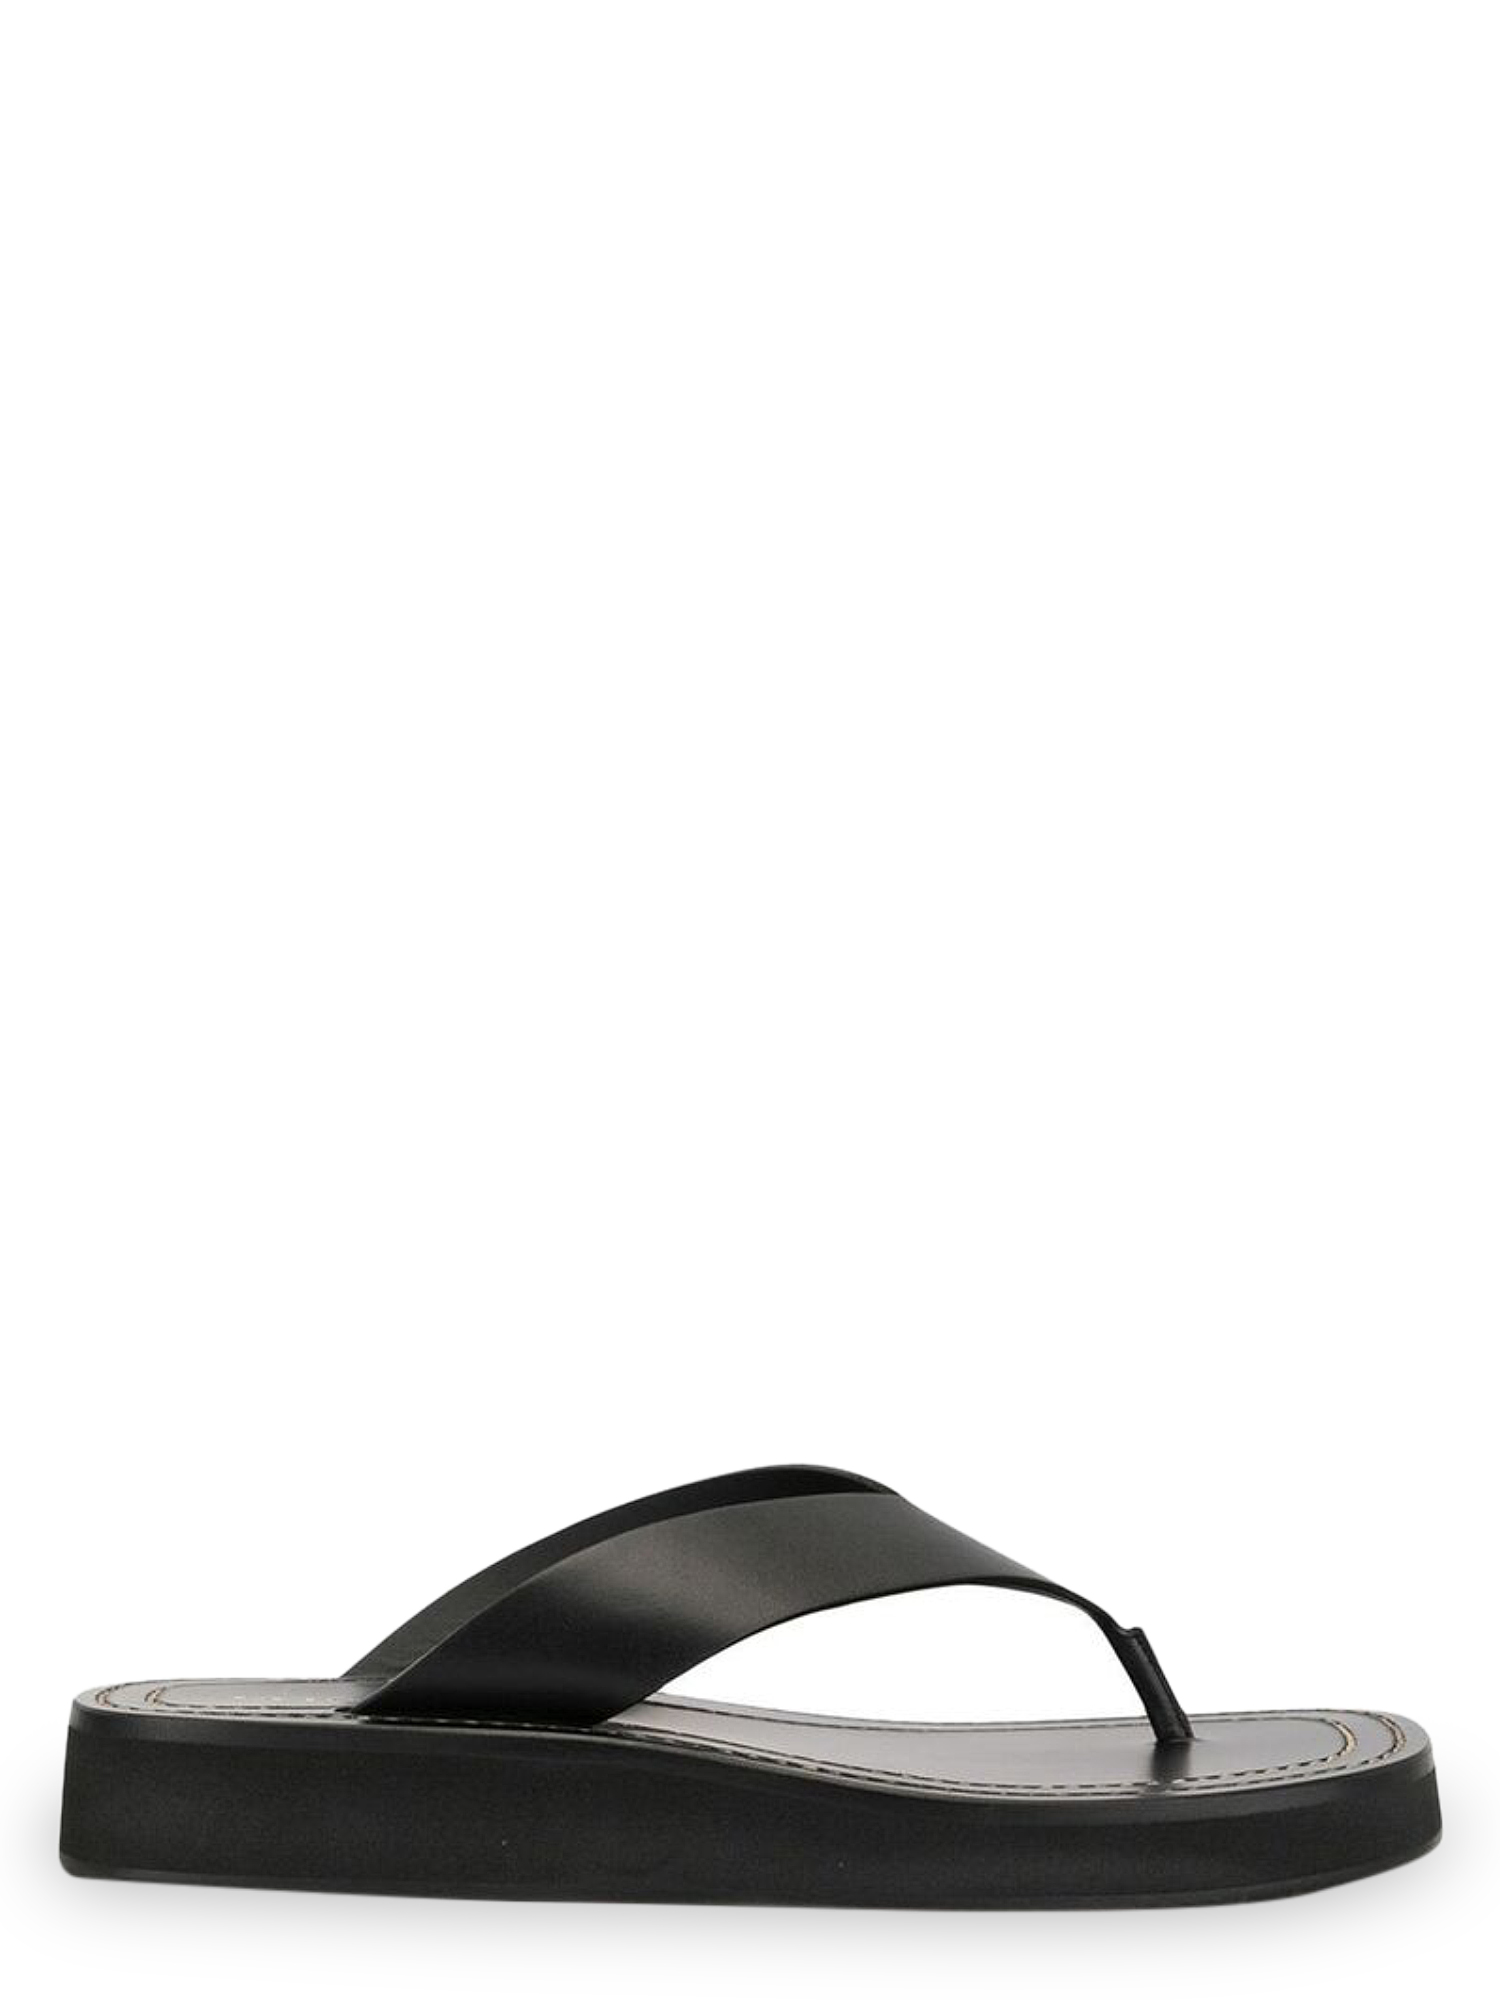 THE ROW WOMEN'S SANDALS - THE ROW - IN BLACK LEATHER